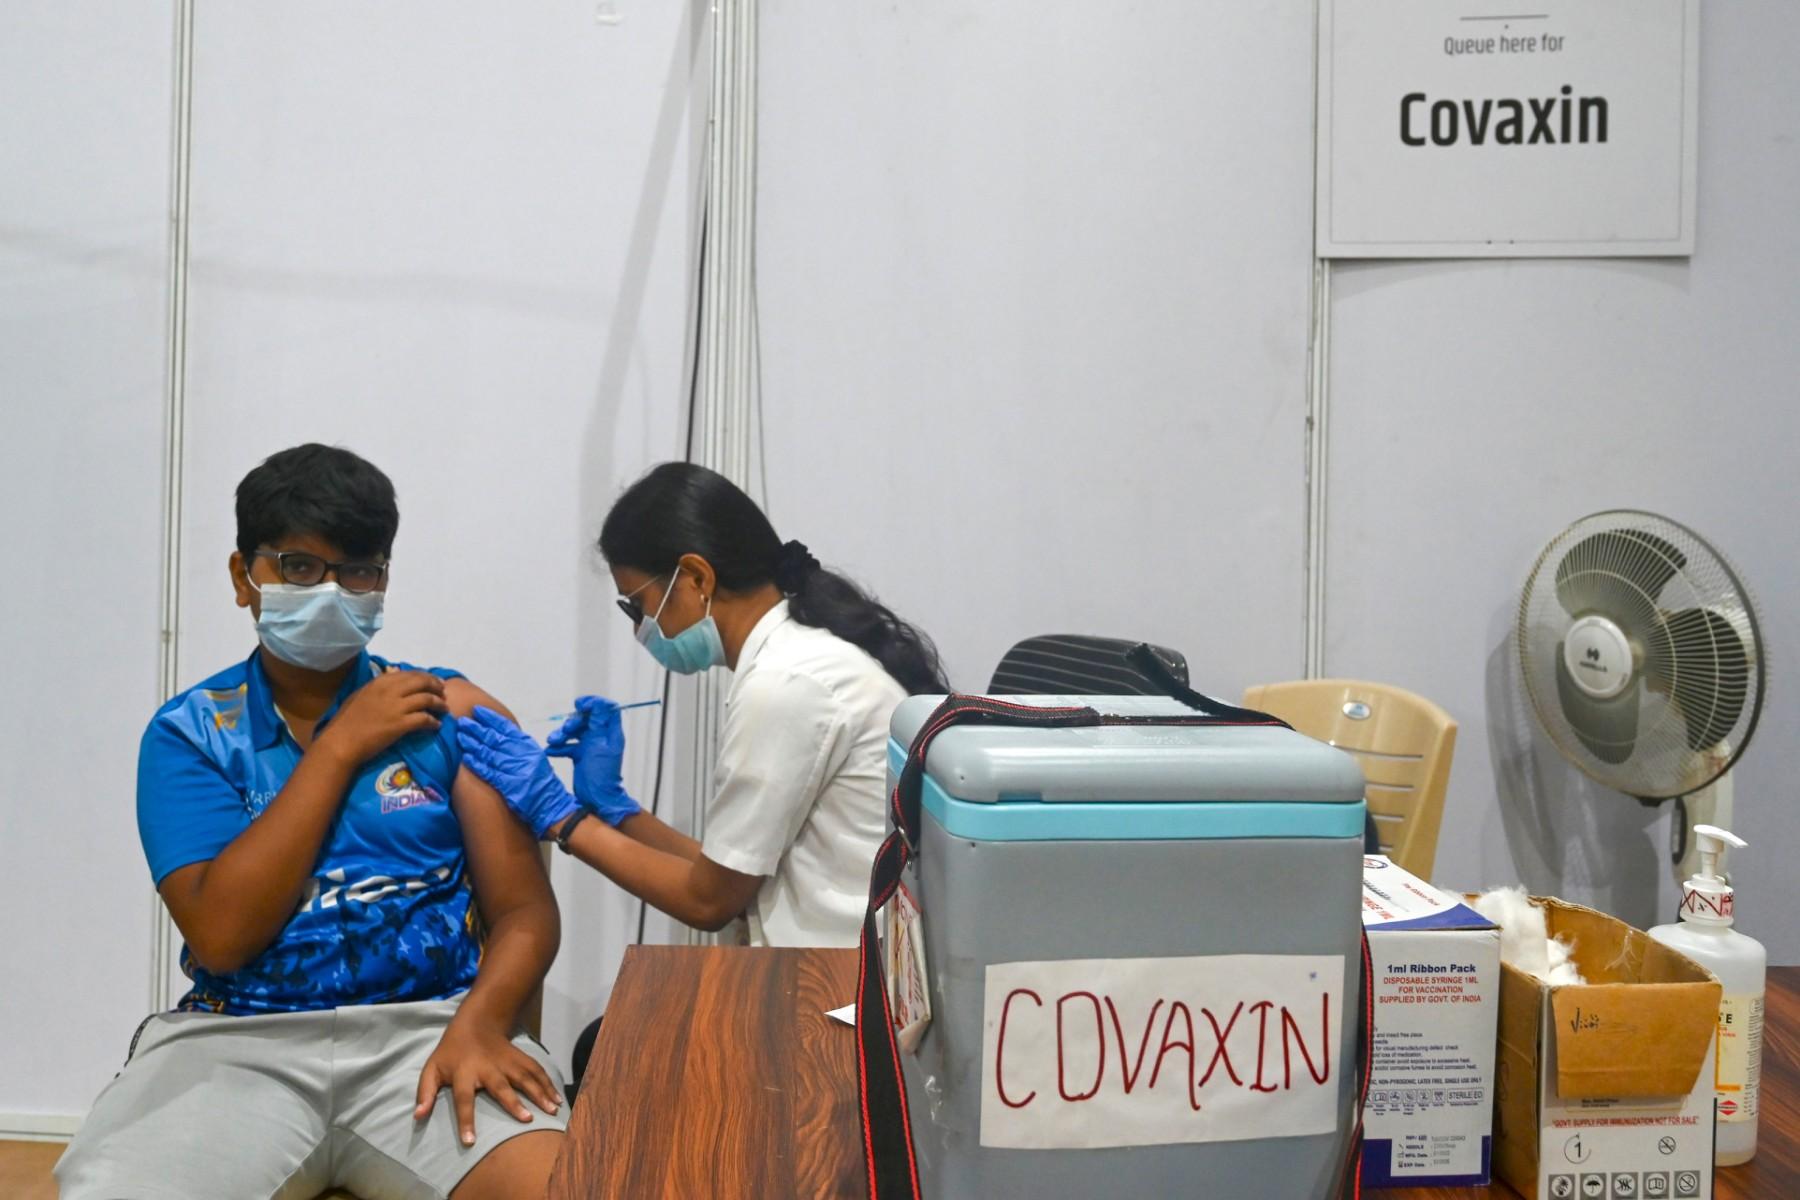 A health worker inoculates a teenage boy with a dose of the Covaxin vaccine against Covid-19 at a vaccination centre in Mumbai on June 9. Photo: AFP